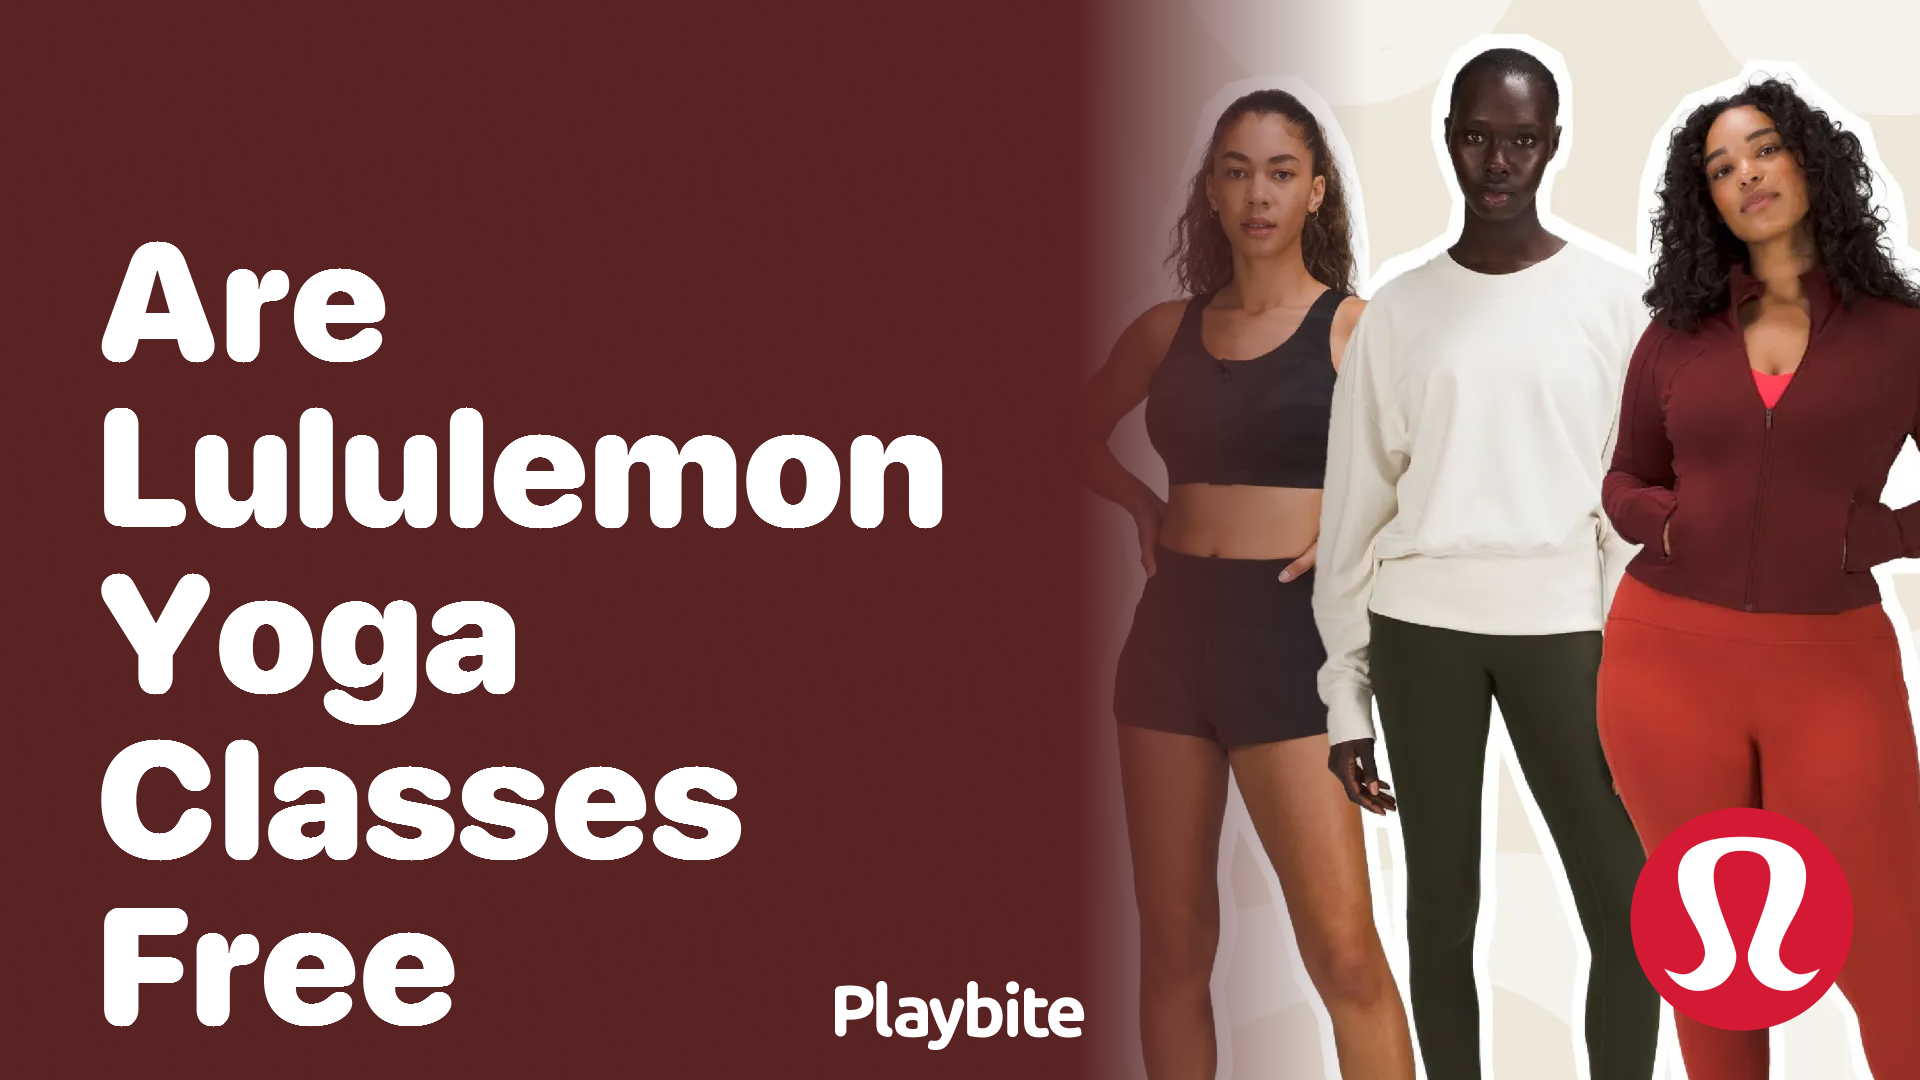 Can You Get a Lululemon Bag for Free? - Playbite